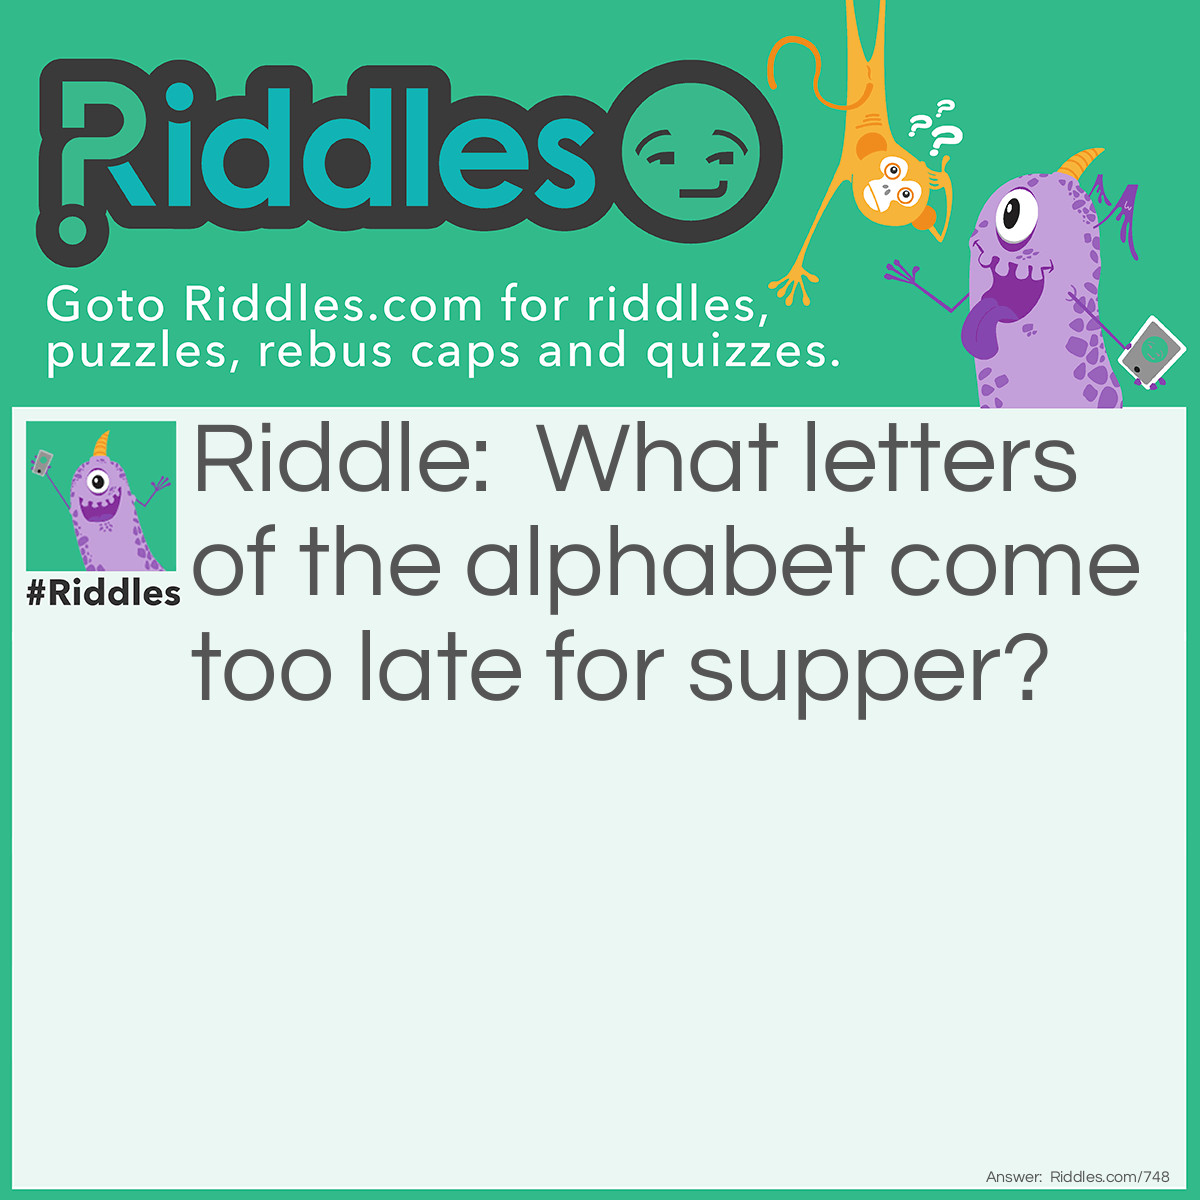 Riddle: What letters of the <a href="https://www.riddles.com/quiz/alphabet-riddles">alphabet</a> come too late for supper? Answer: Those that come after T.